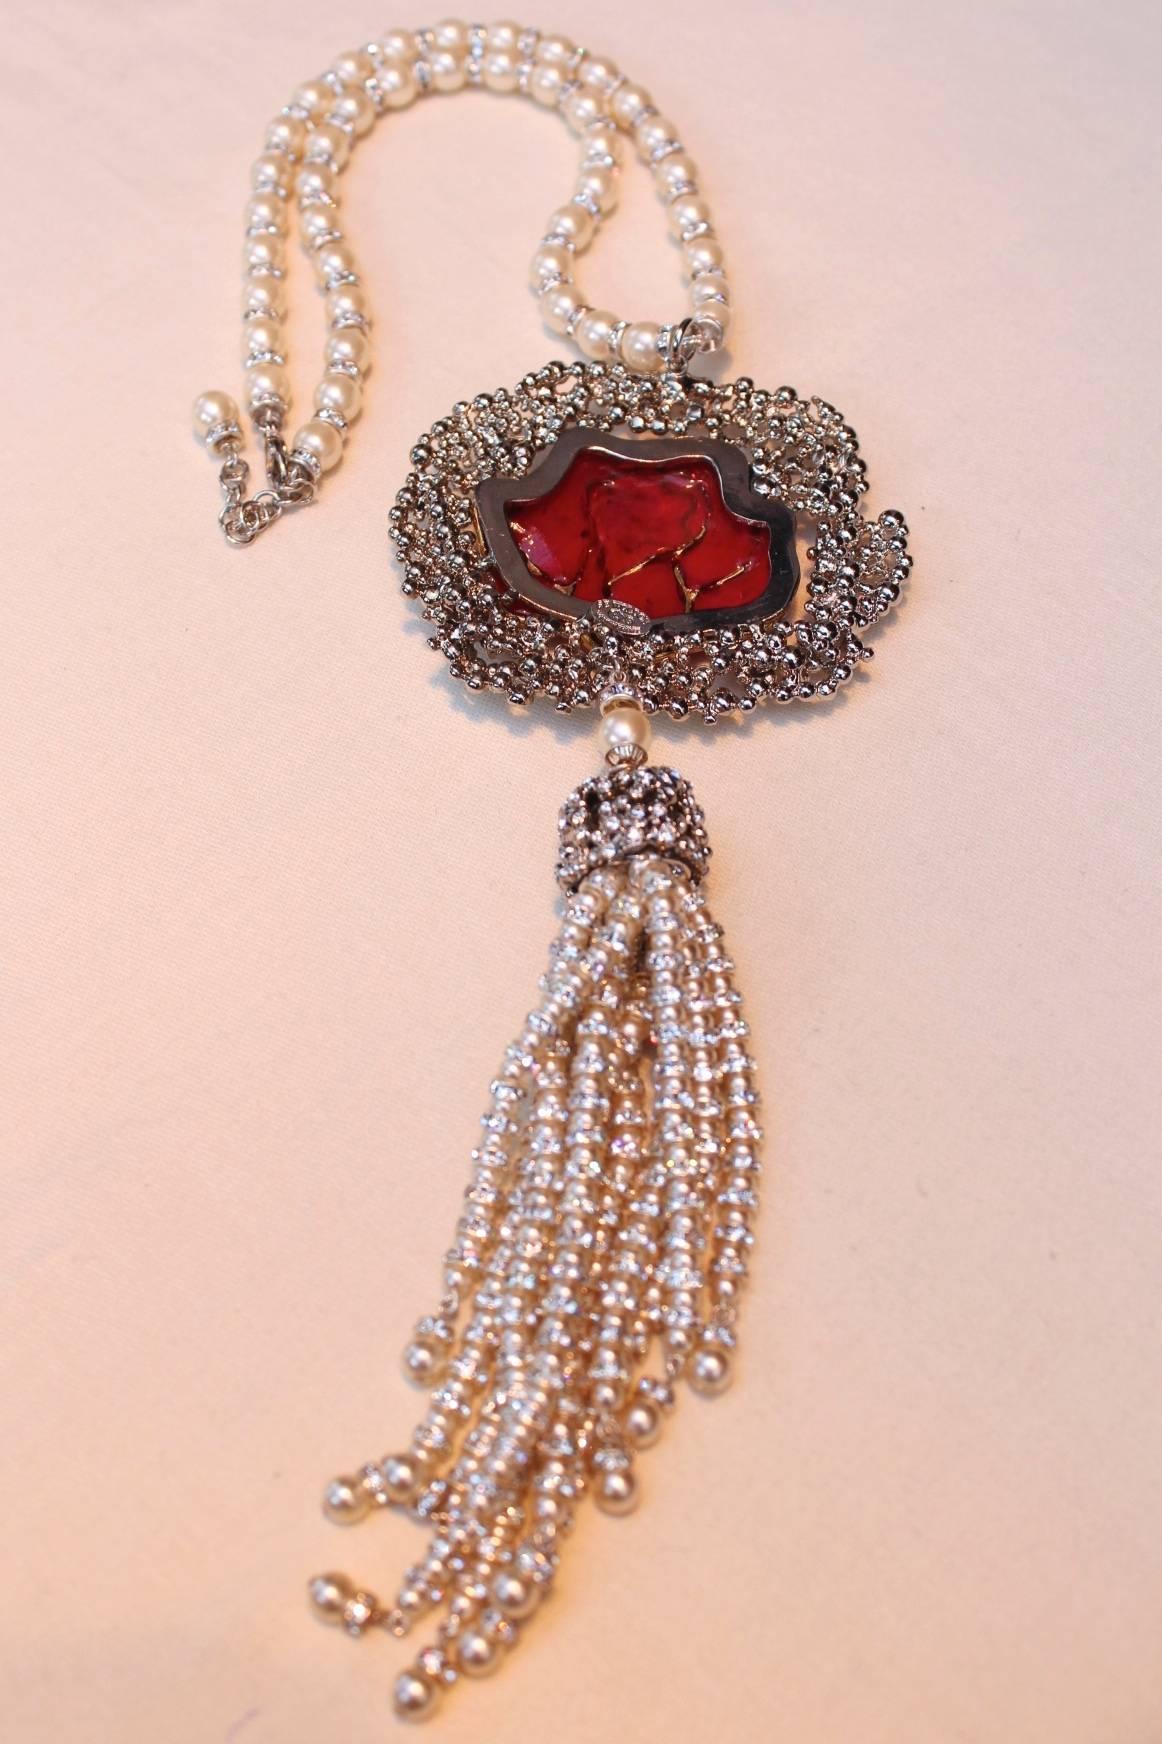 2011 Serge Eric Woloch Pendant Necklace with a Red Glass Rose and White Crystals 2